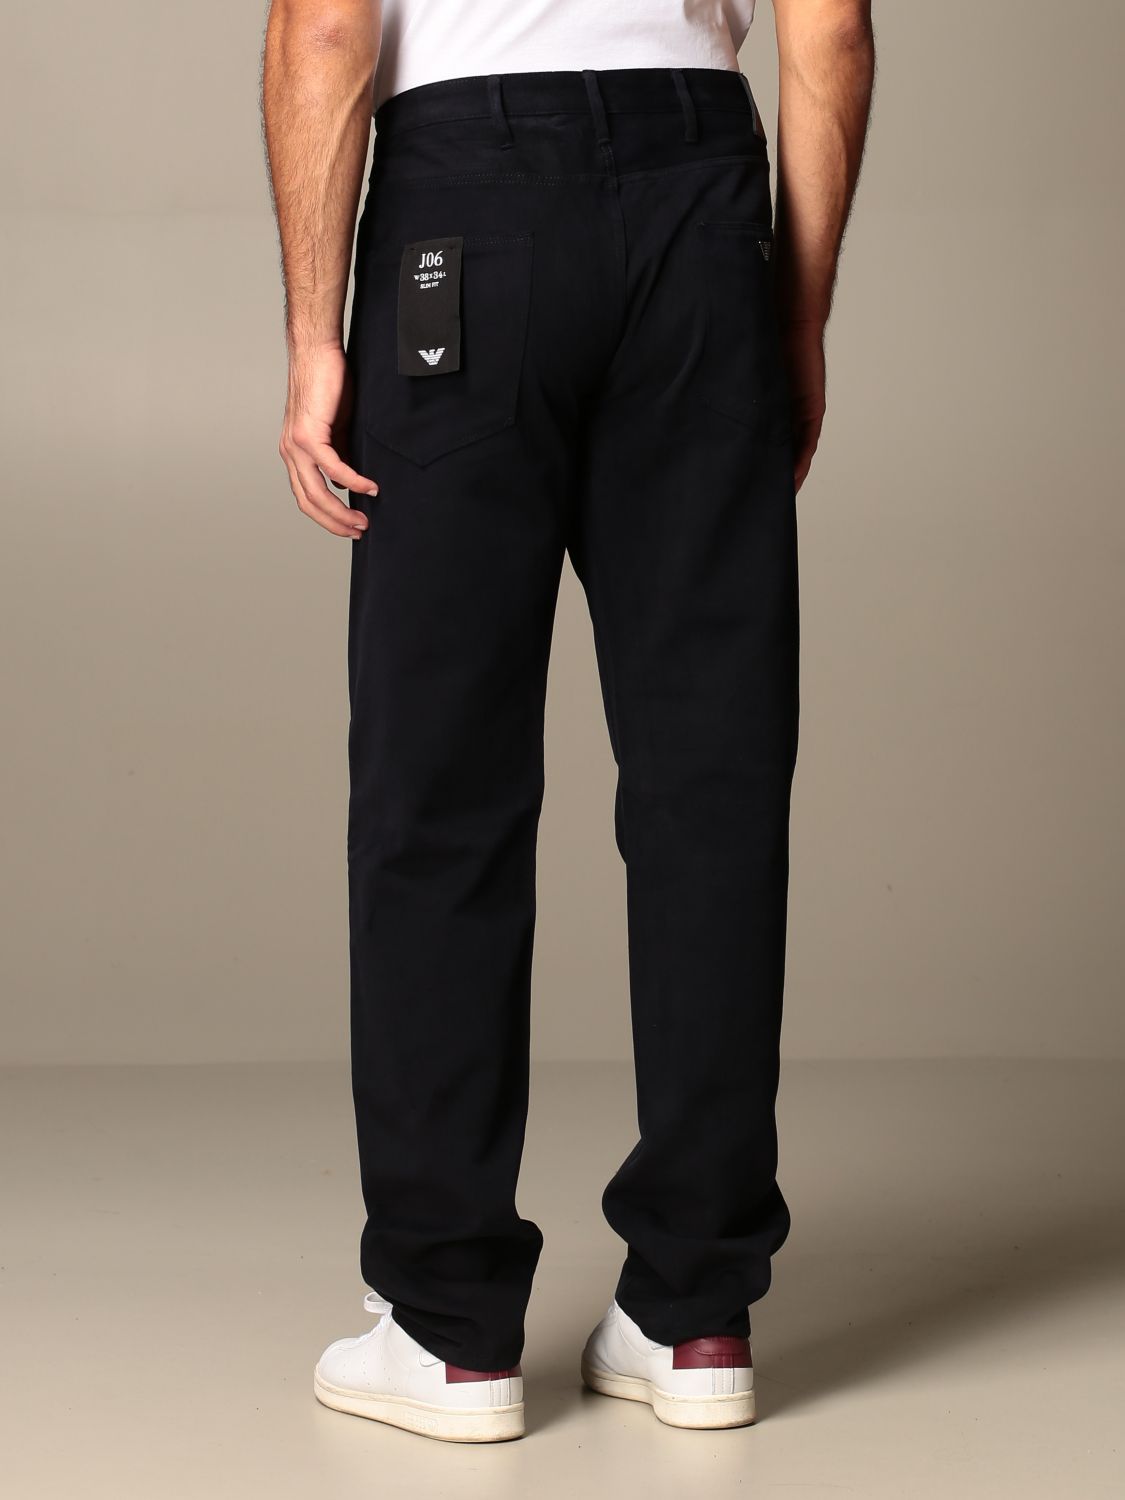 Emporio Armani Outlet: trousers in soft cotton twill | Pants Emporio ...